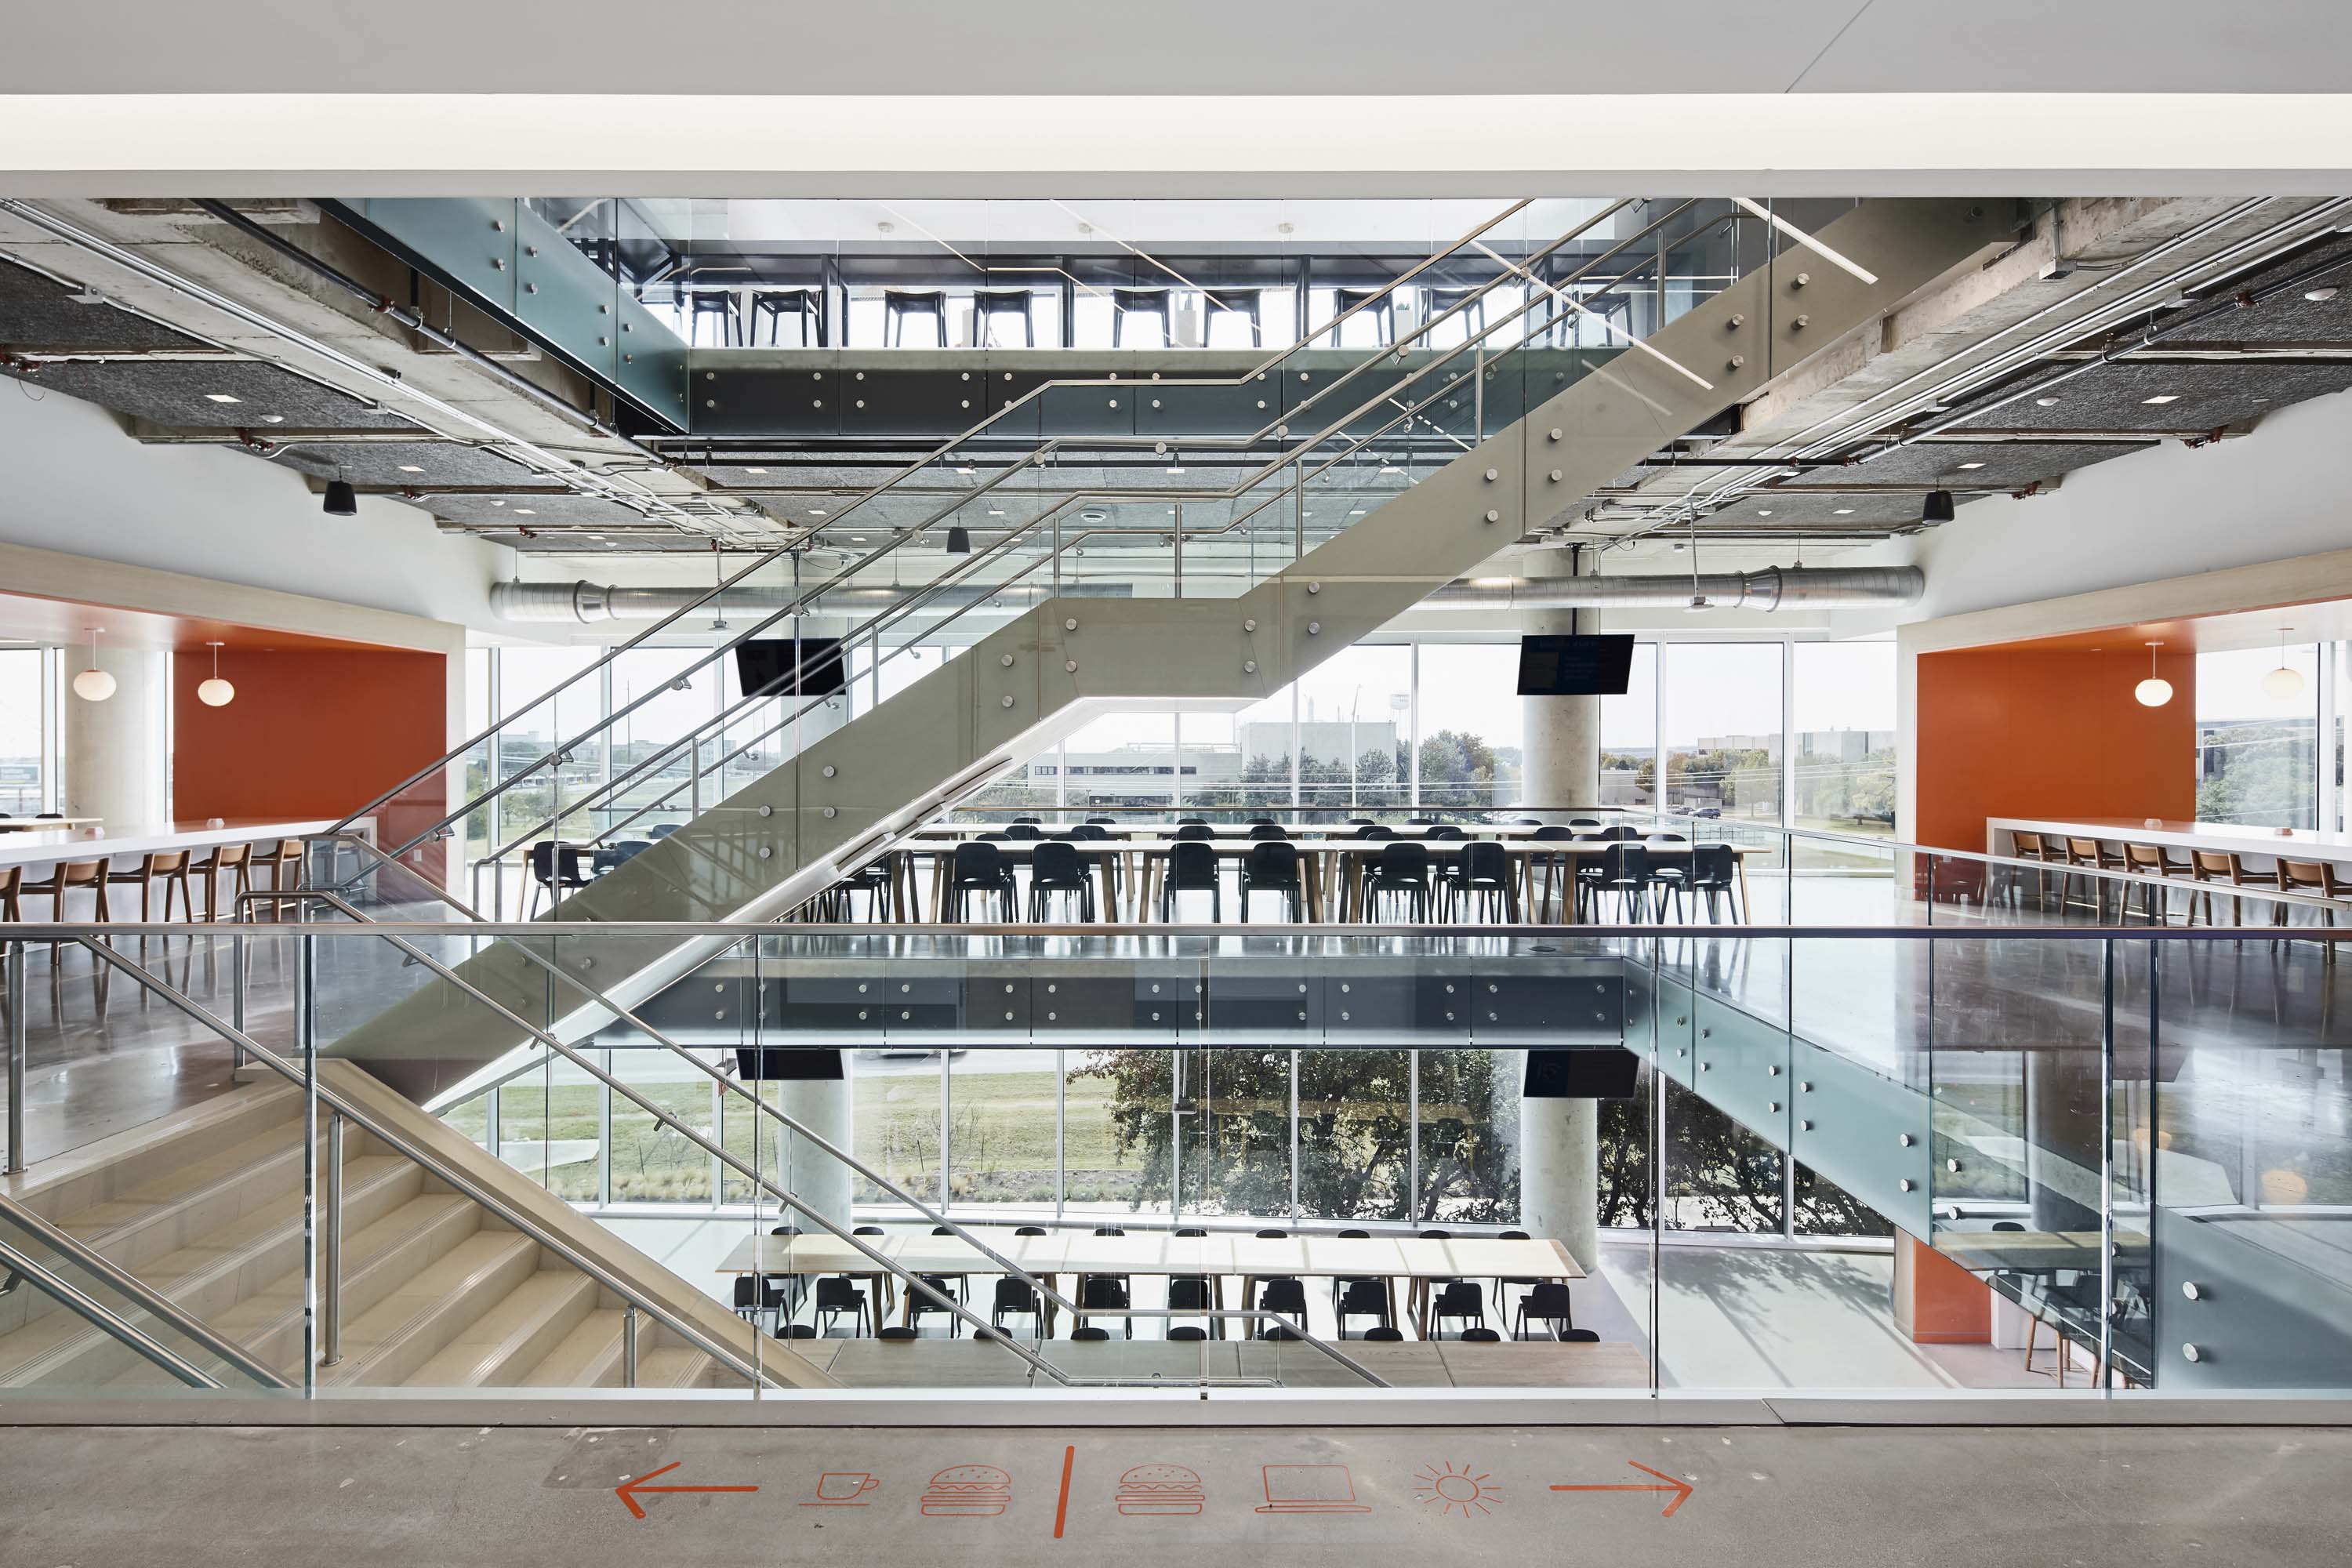 Landing area featuring stairs and open space work areas of Indeed.com in Austin, Texas by Specht Novak Architects, shot by Andrea Calo.